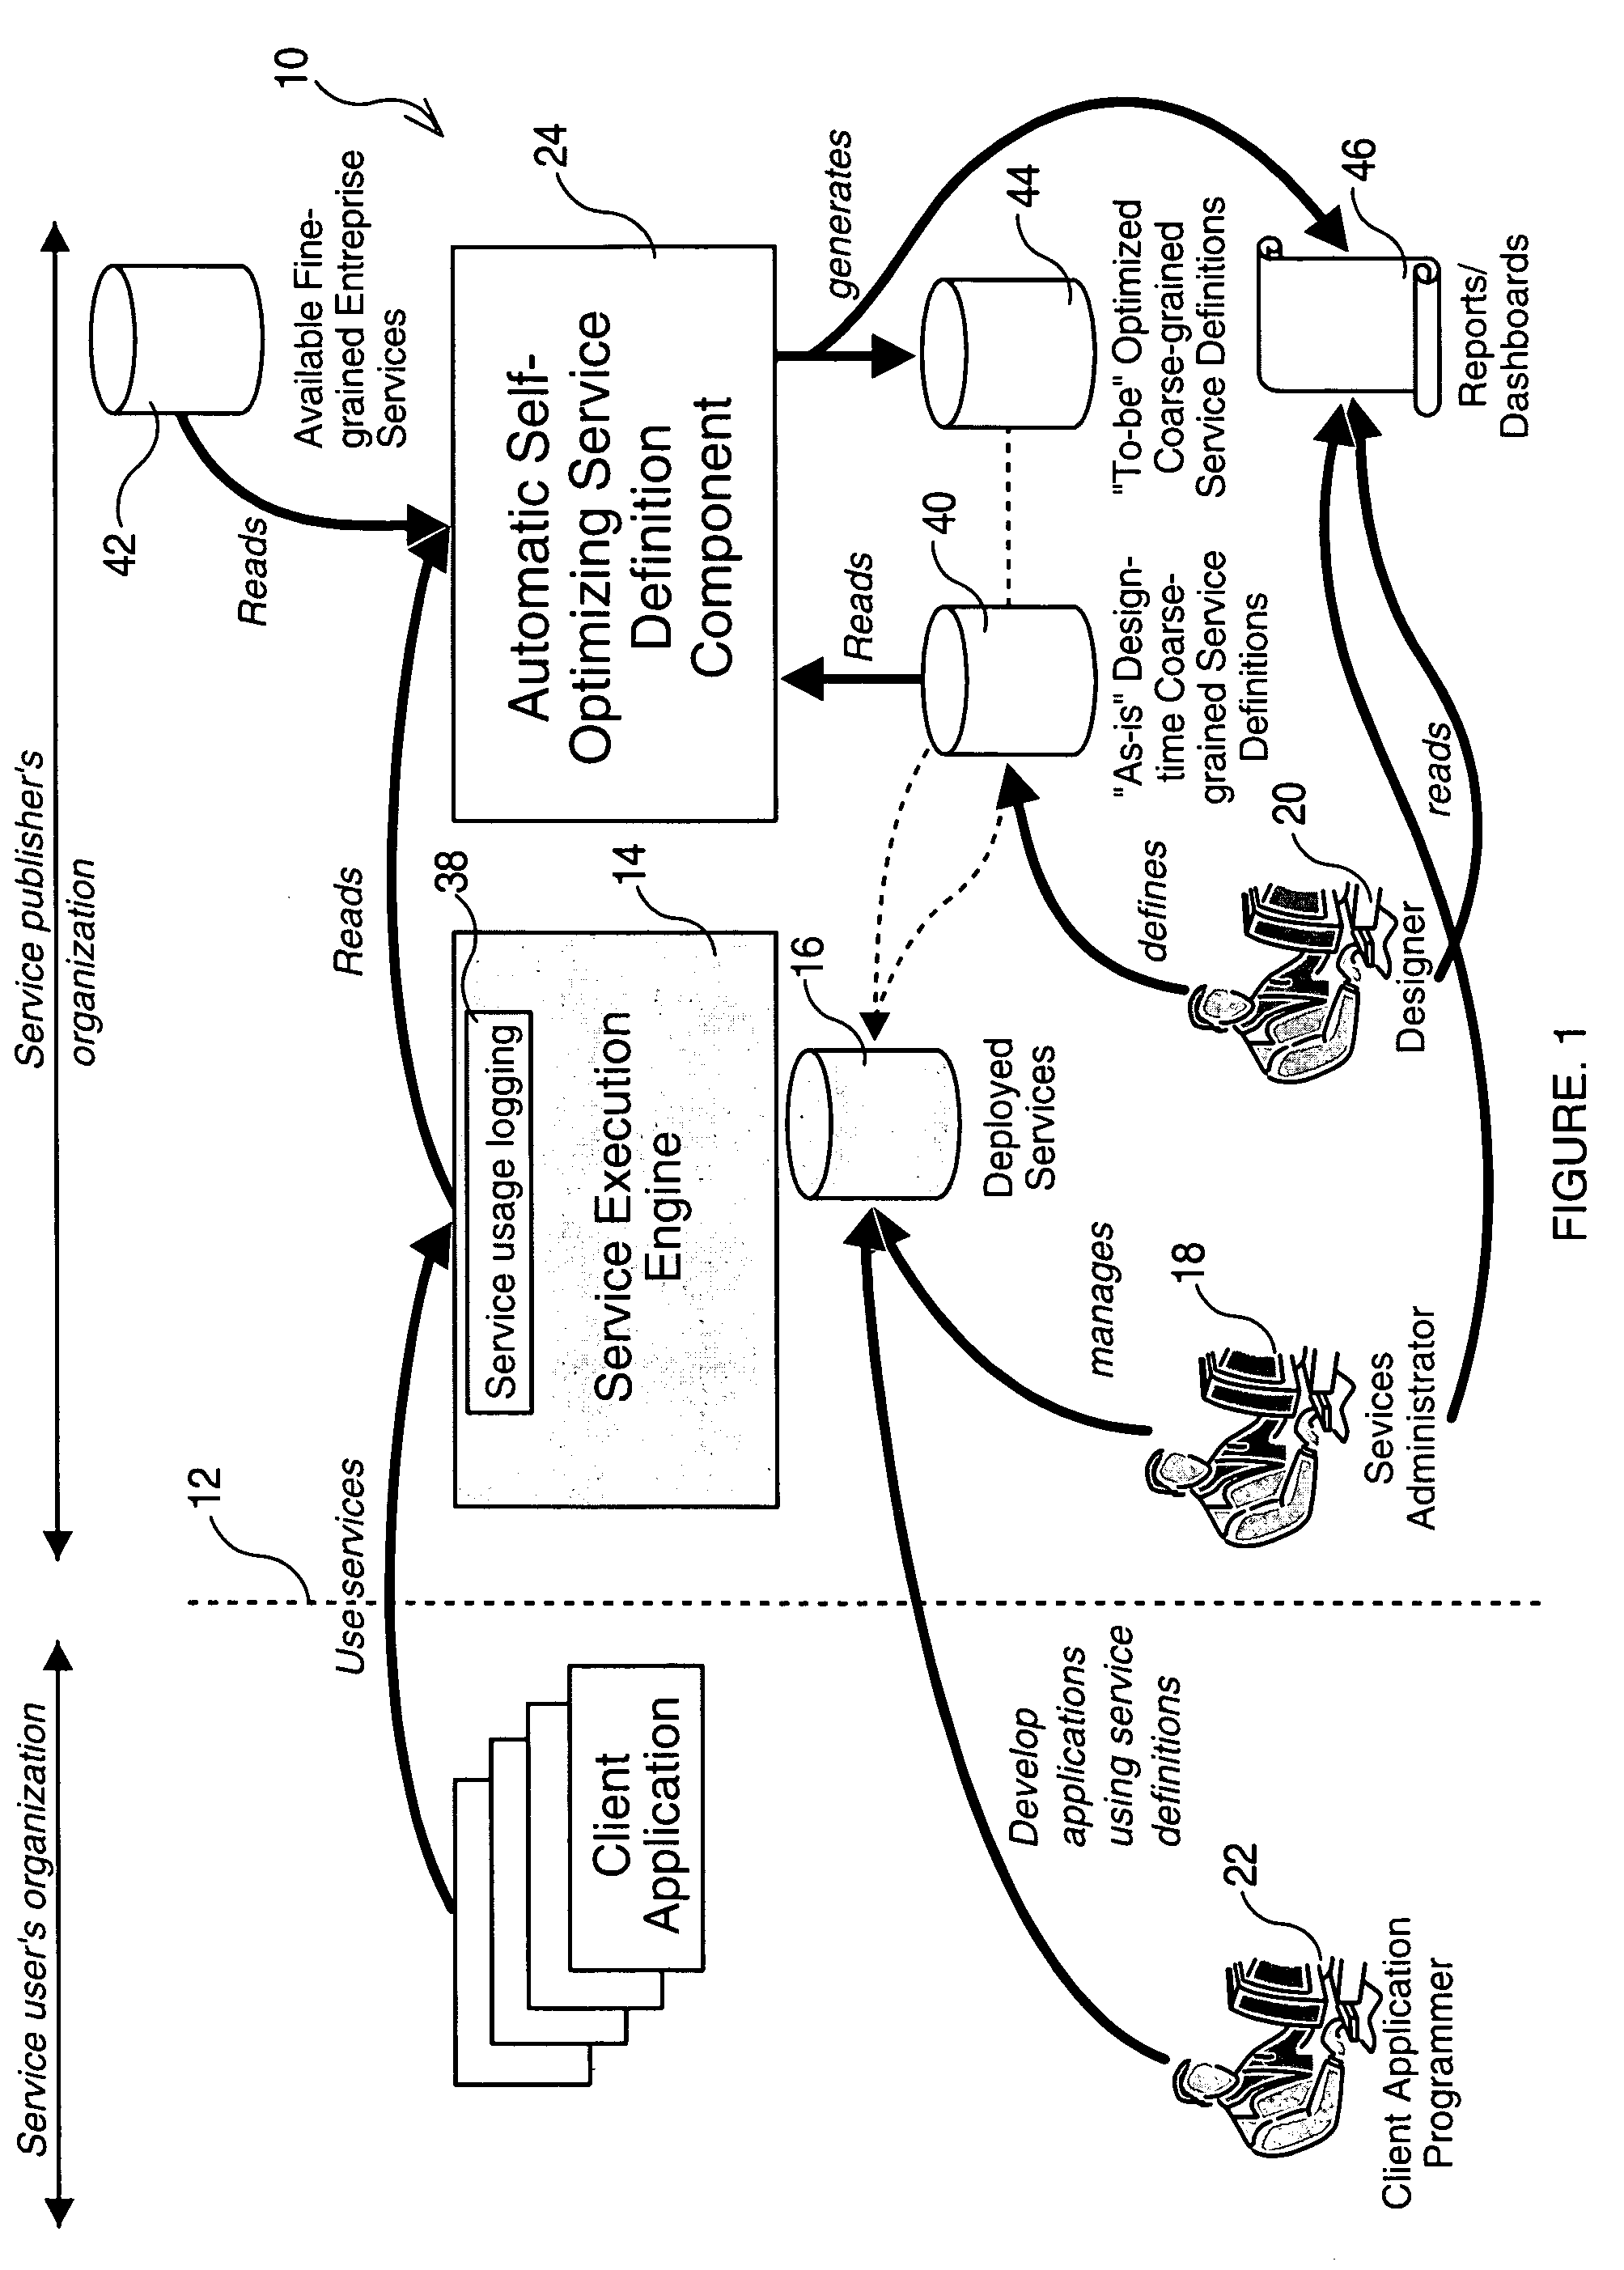 Method and system for automatically generating service interfaces for a service oriented architecture